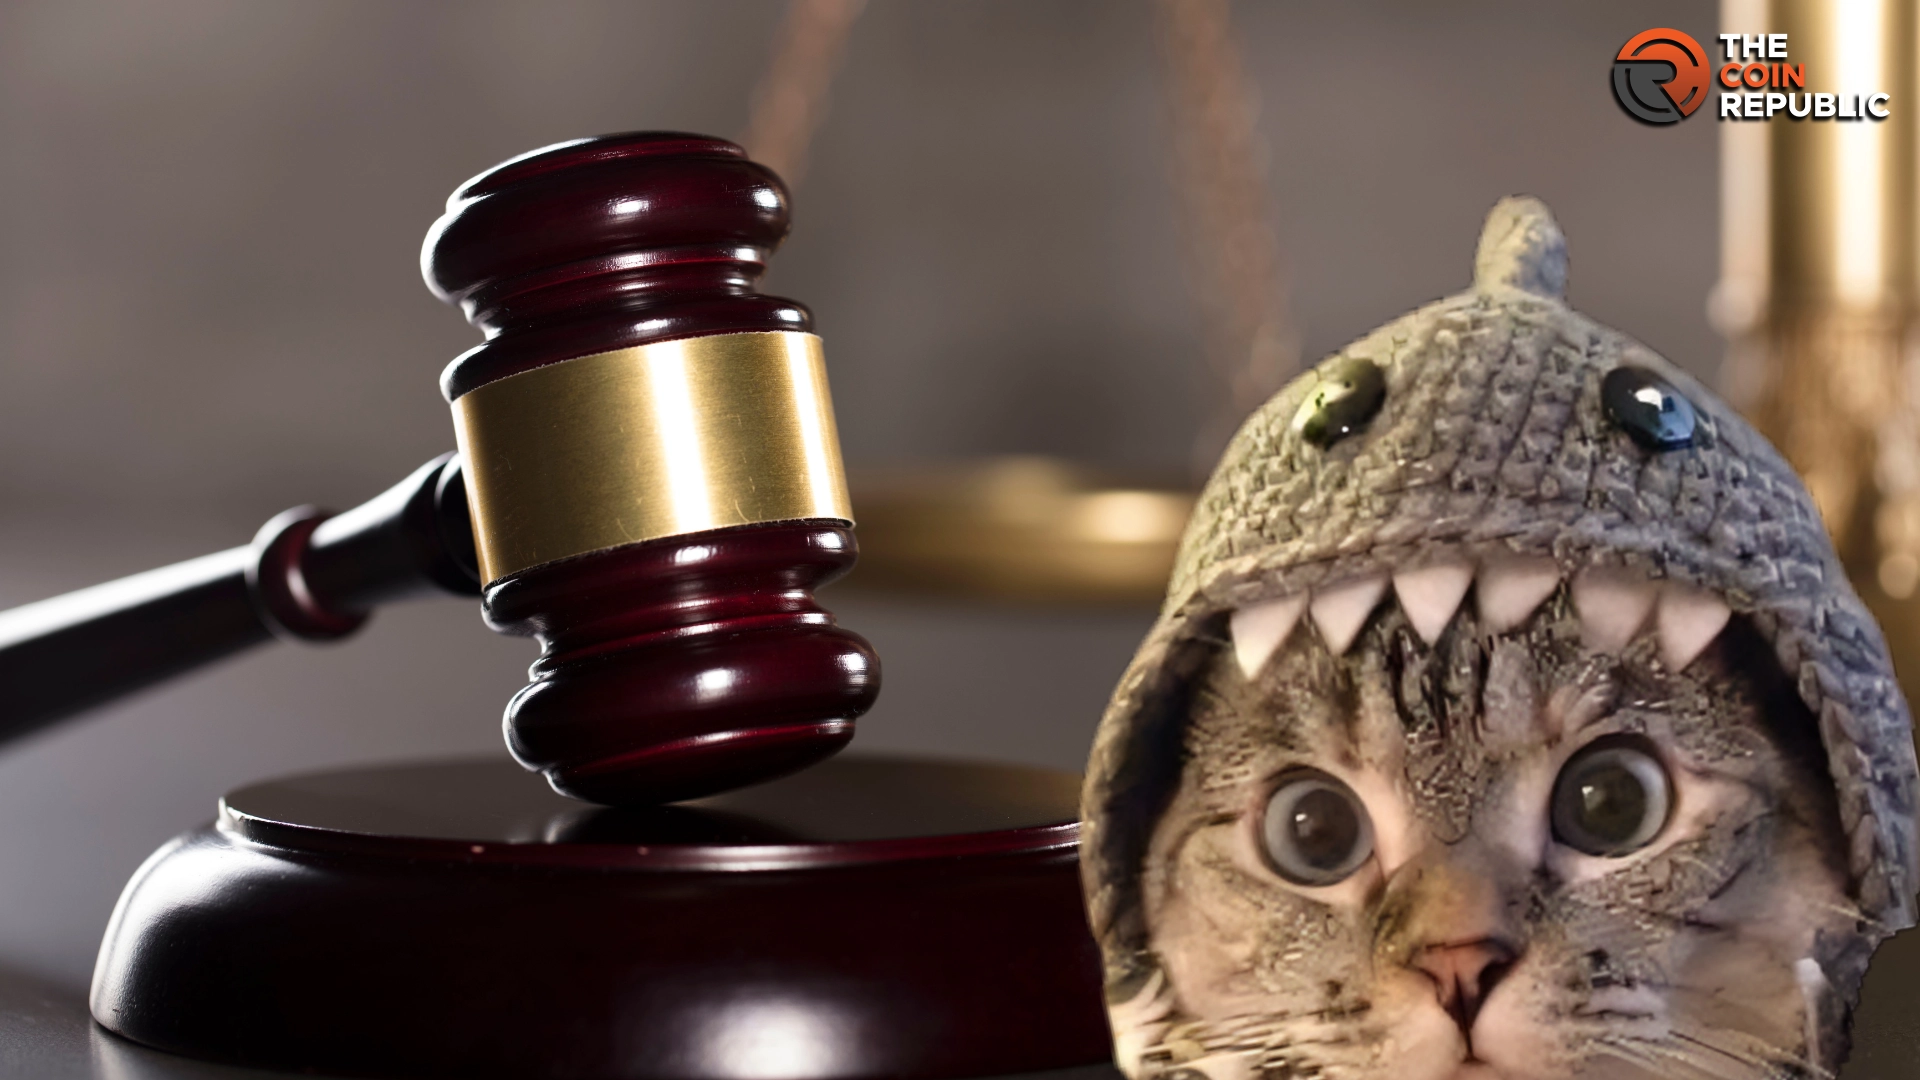 A fight Over Shark Cat Meme Coin, Involved In A Legal Battle